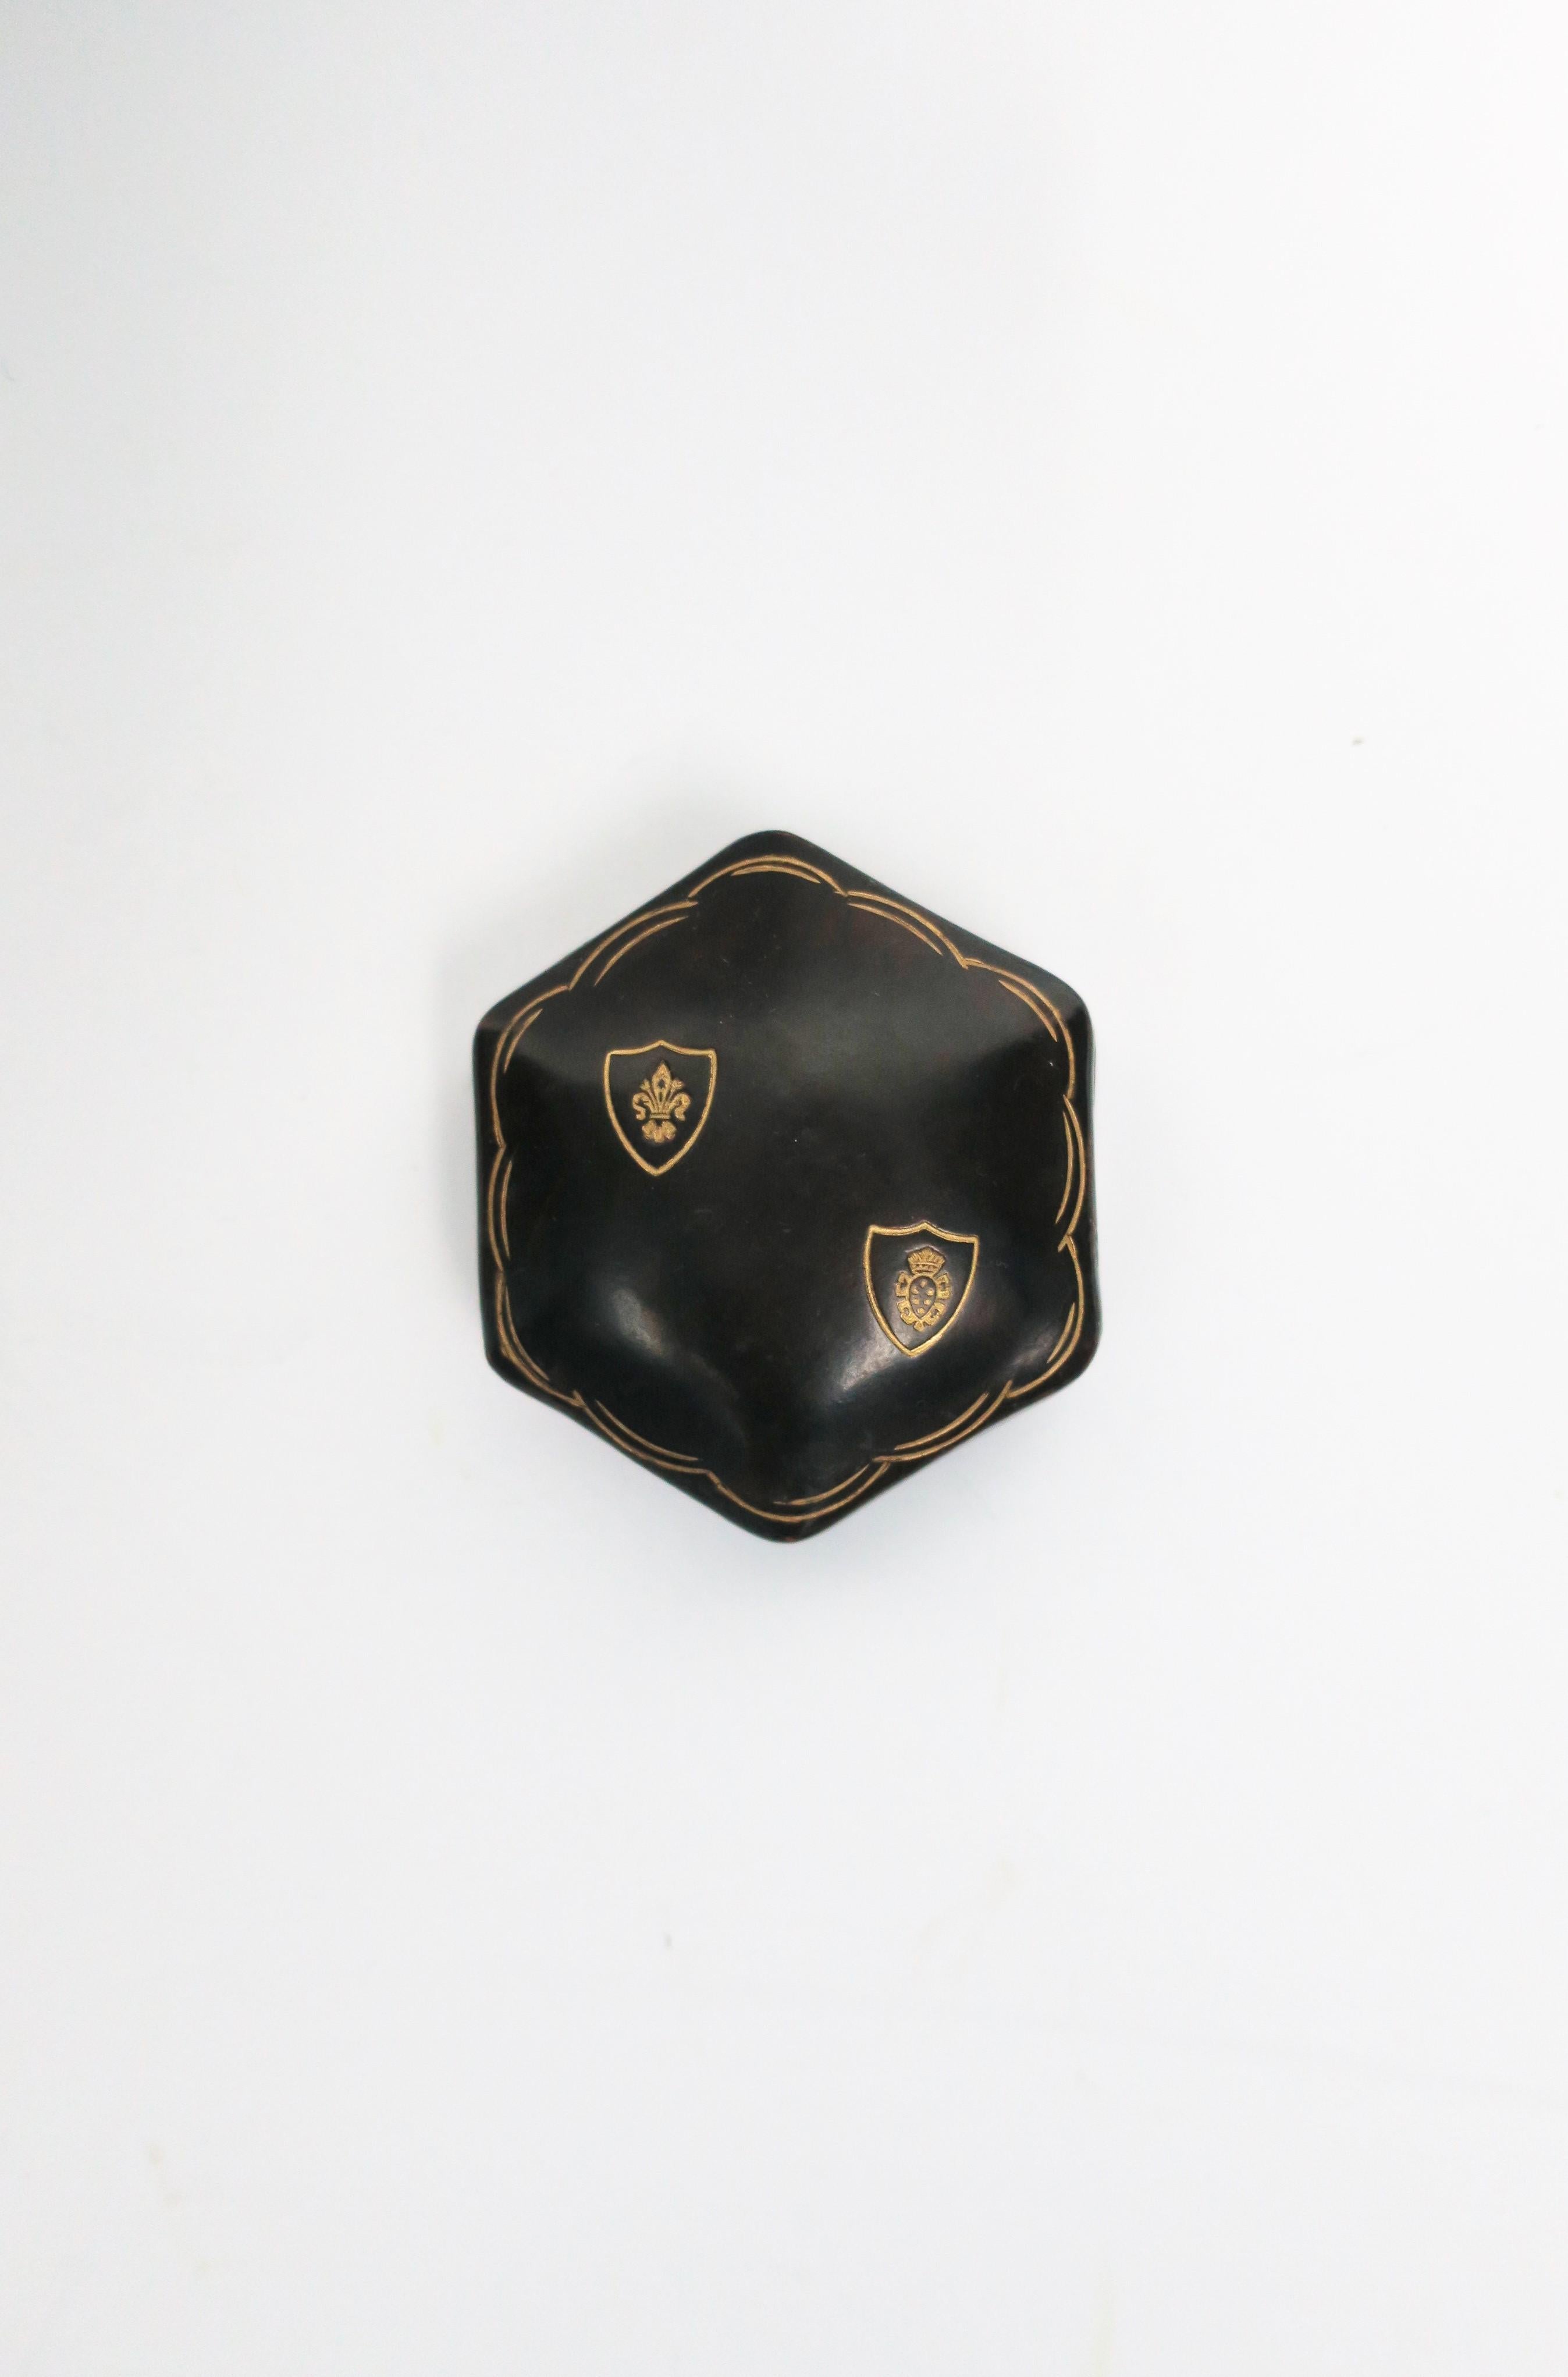 A vintage Italian dark brown leather jewelry box in an octagonal shape with gold embossing on top/lid, circa mid-20th century, Italy. Dimensions: 2.5